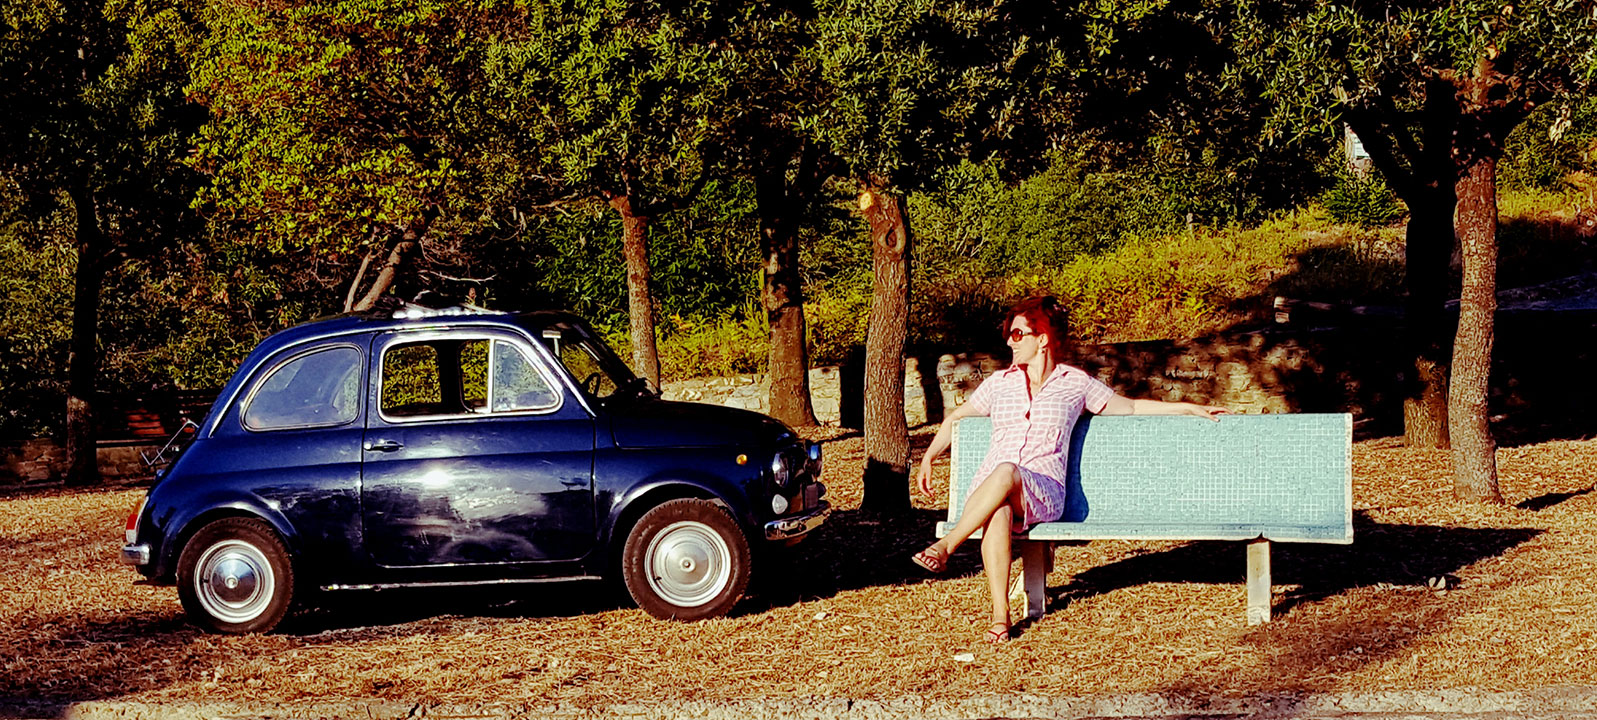 Lois Pryce sitting on a bench by an Italian vintage Fiat car